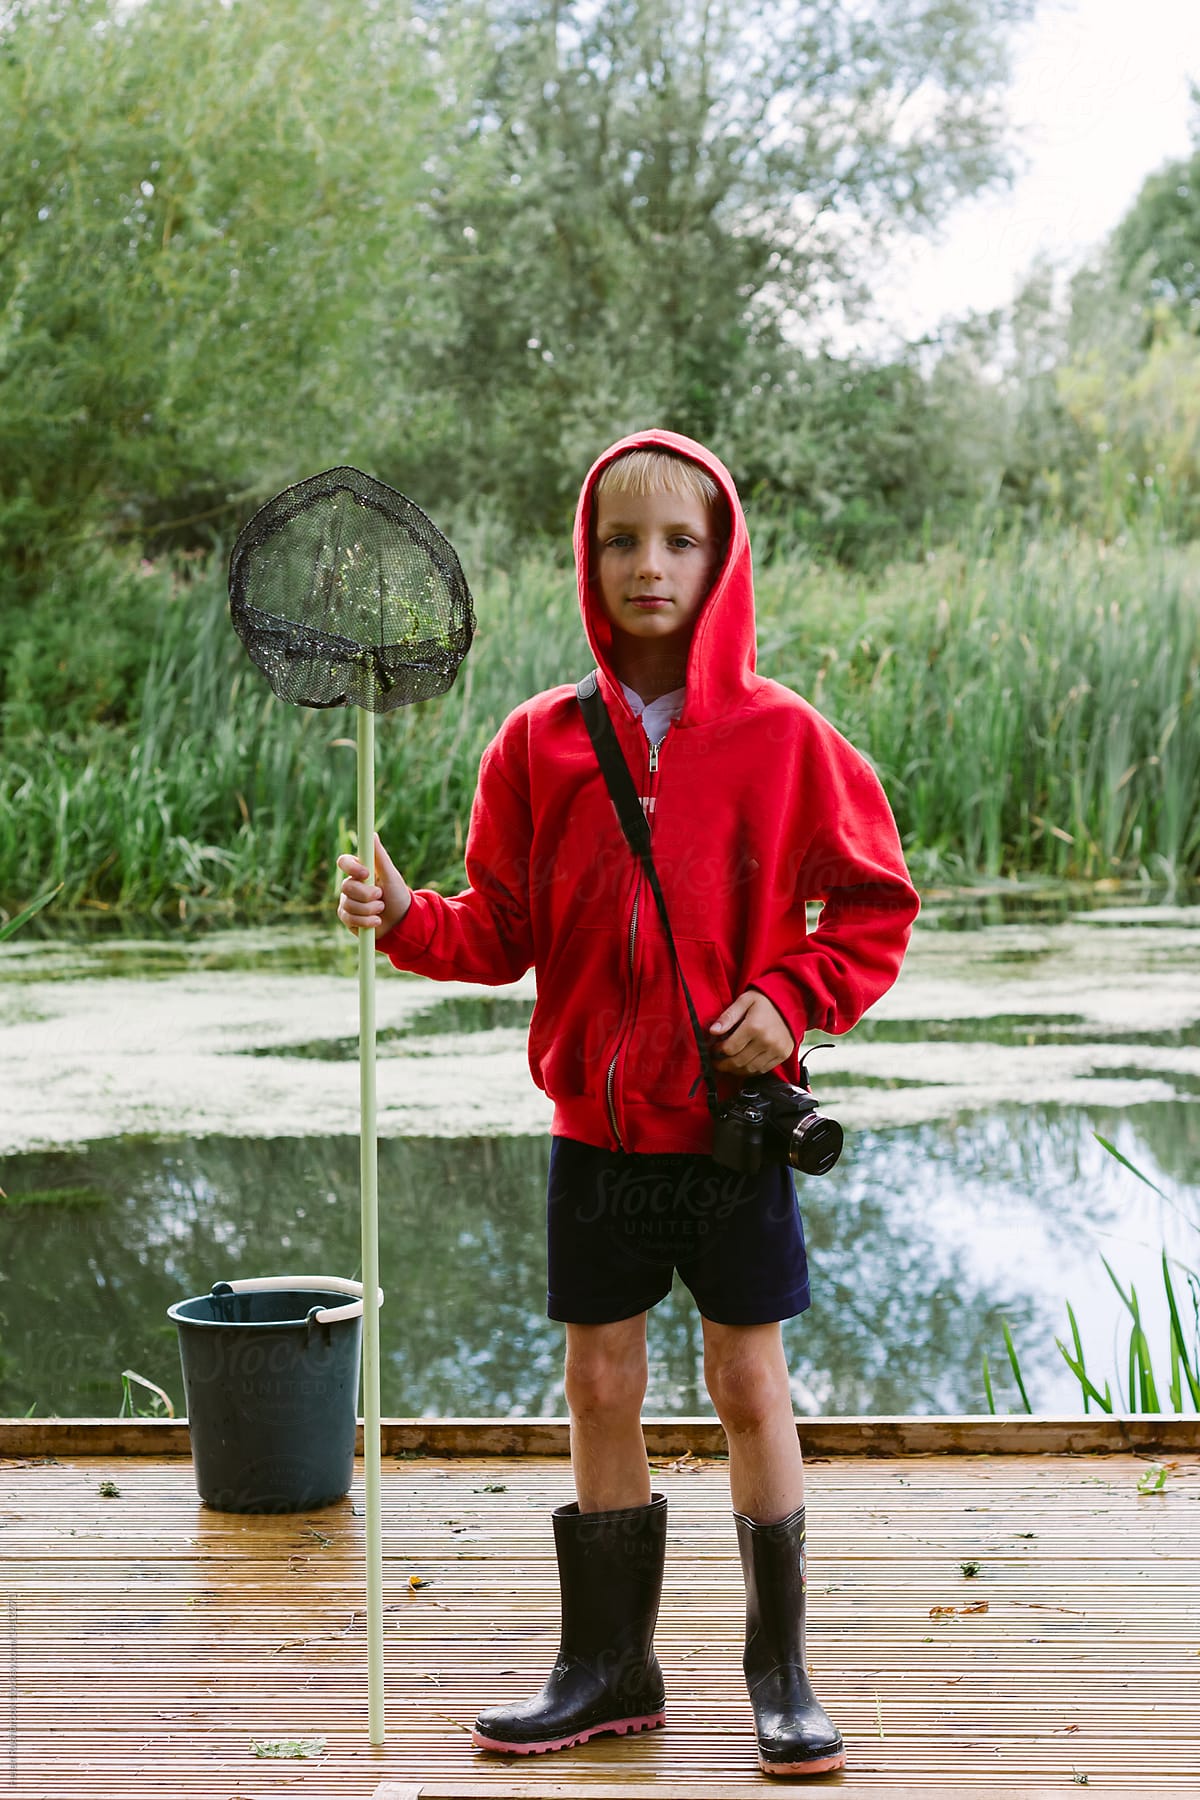 A Young Boy With A Bucket And Fishing Net About To Go Pond Dipping. by  Stocksy Contributor Helen Rushbrook - Stocksy